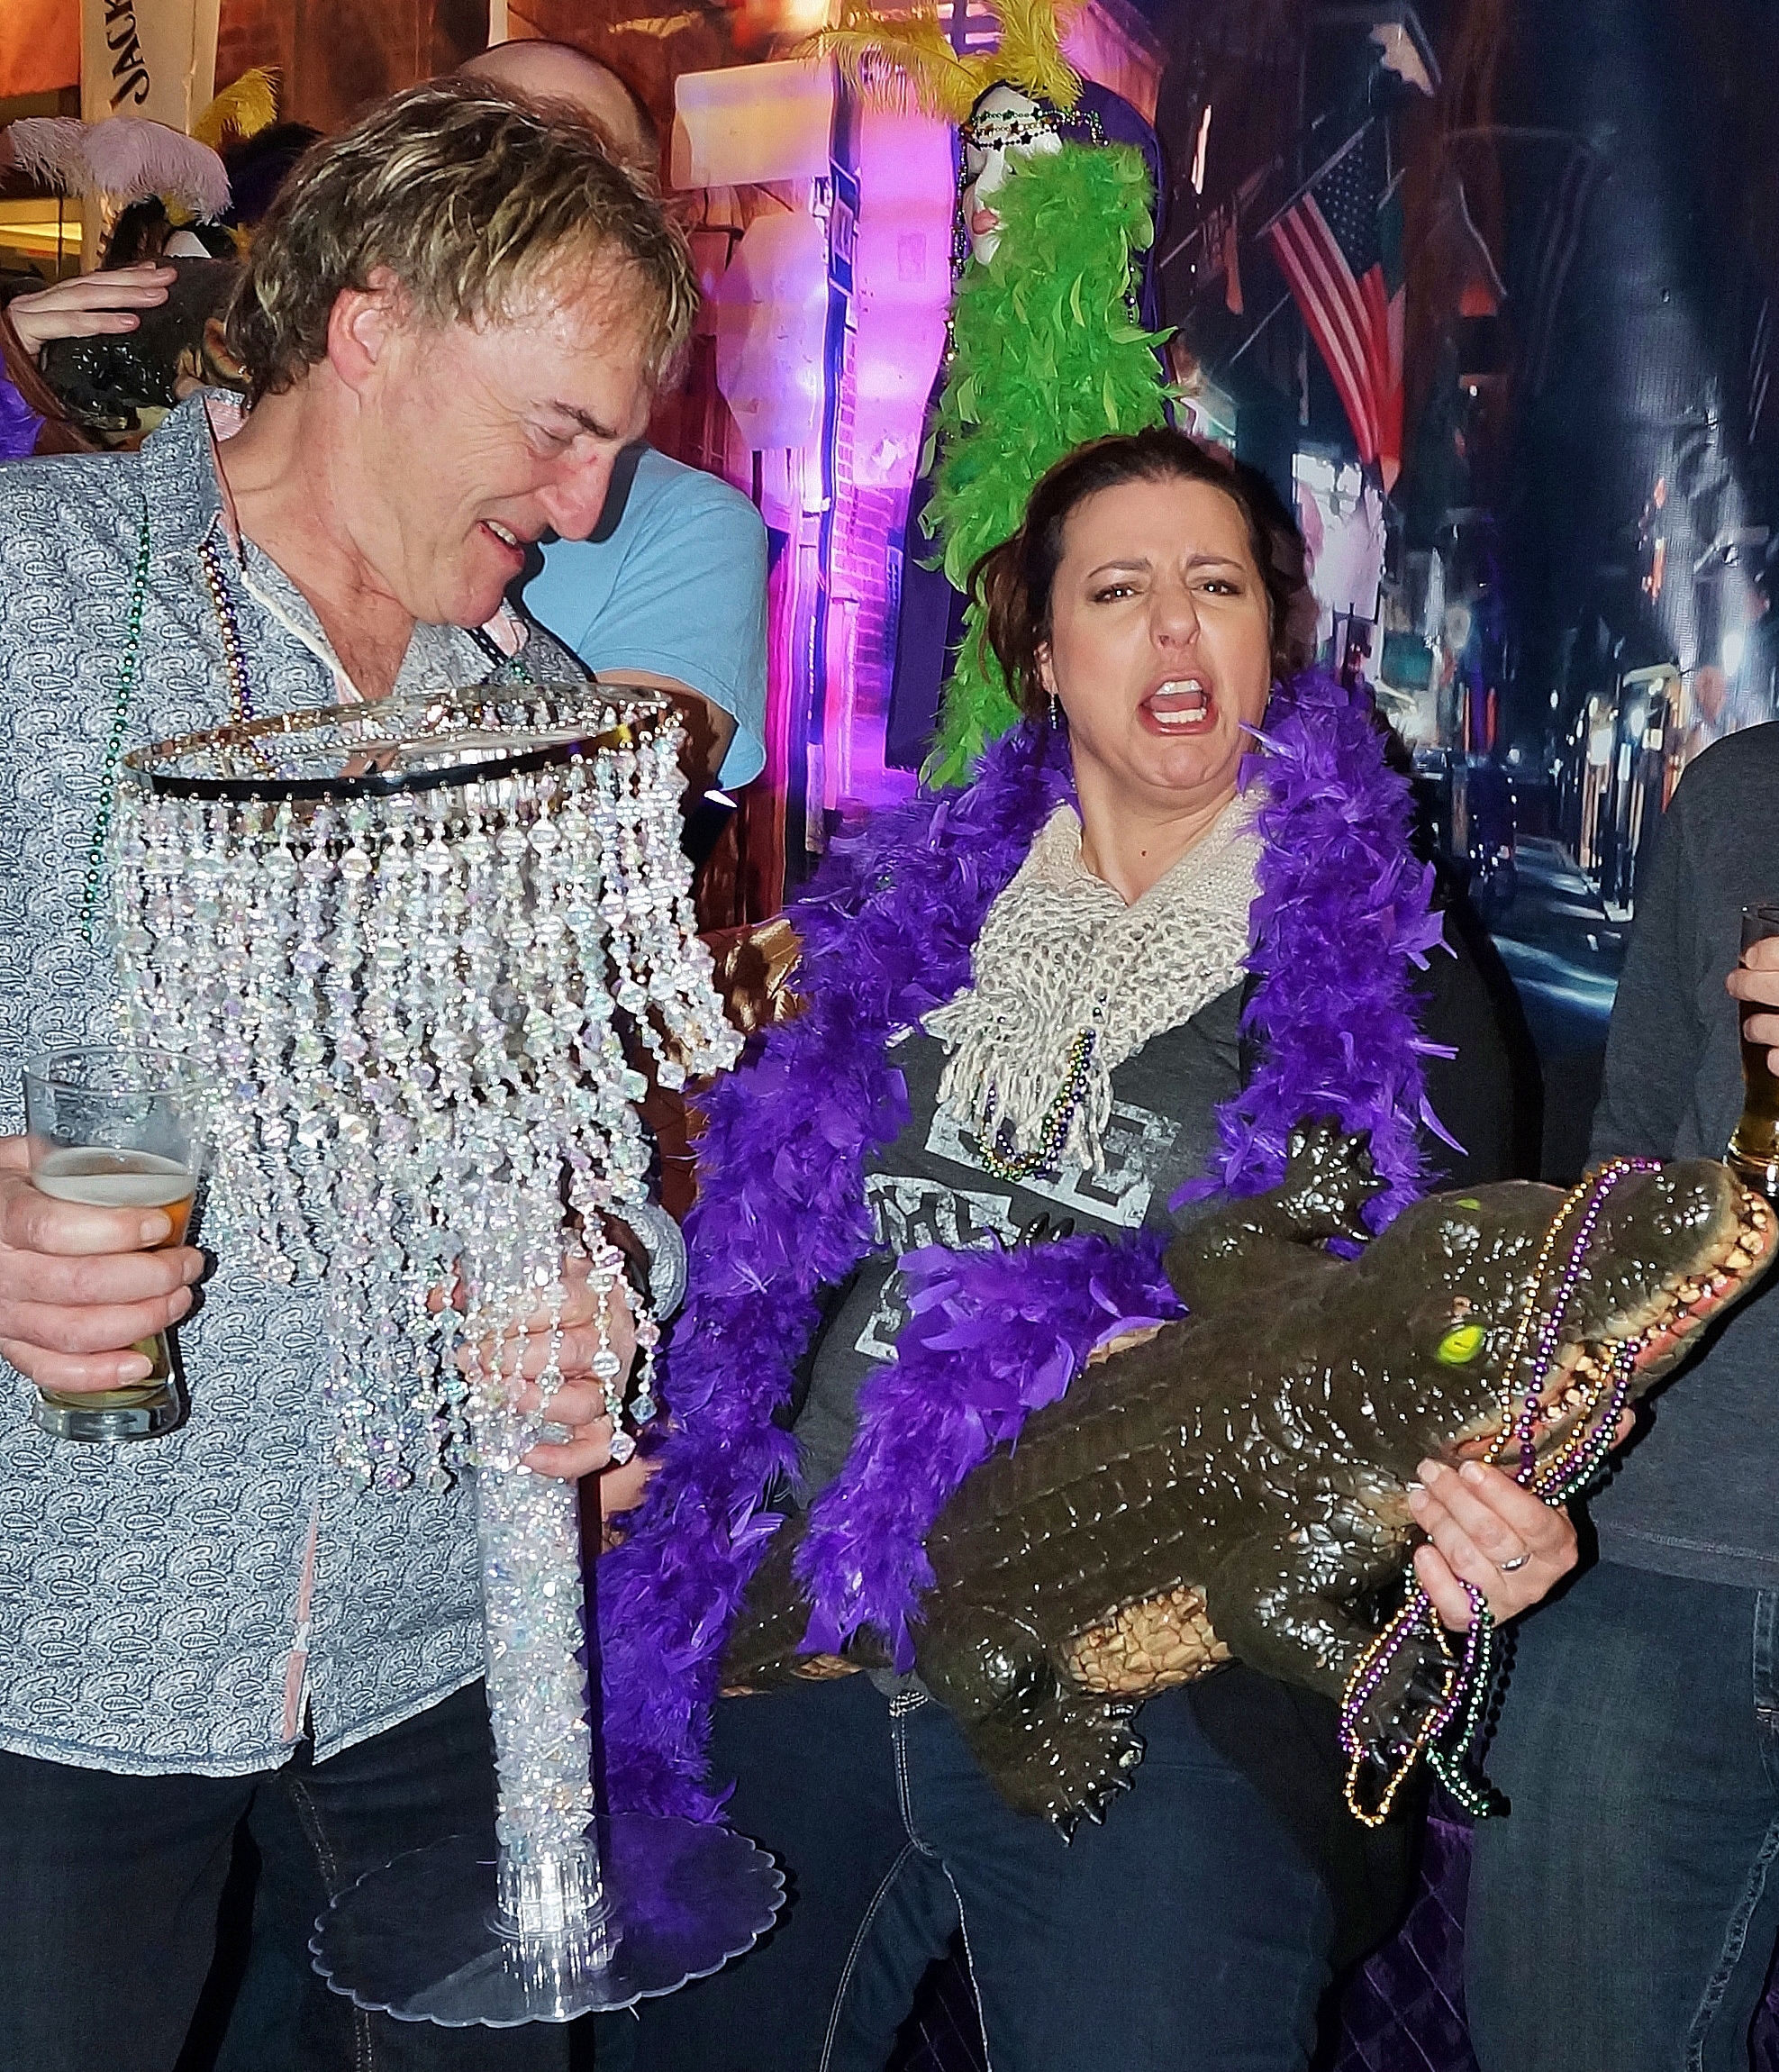 Tom McGouran lampshade at the ready with Alix Michaels rocking out with an Aligator at Mardi Gras Media Night